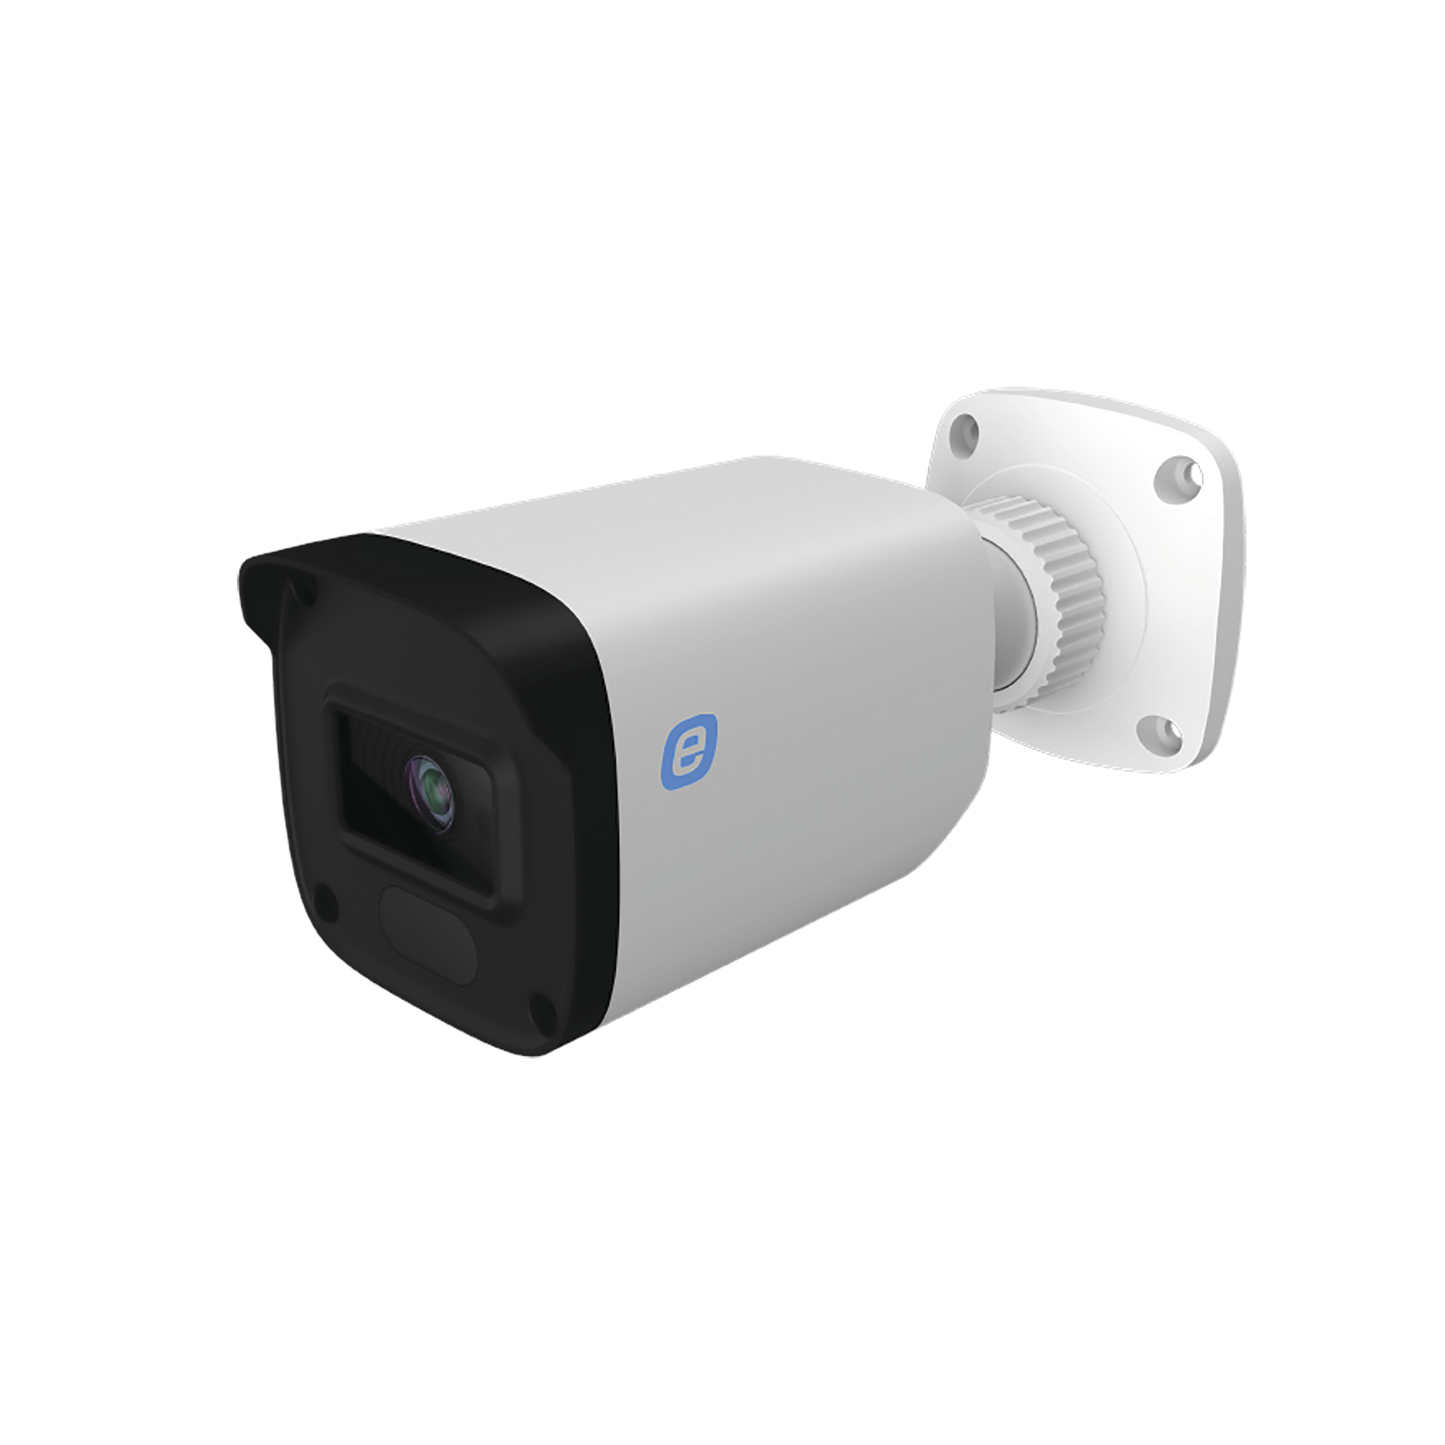 HD-TVI - Bullet 5MP / 24/7 Color Image / White Light 98ft (30m) / 3 in 1 / Audio by Coaxitron / Built-In Microphone / Metal Housing / IP67